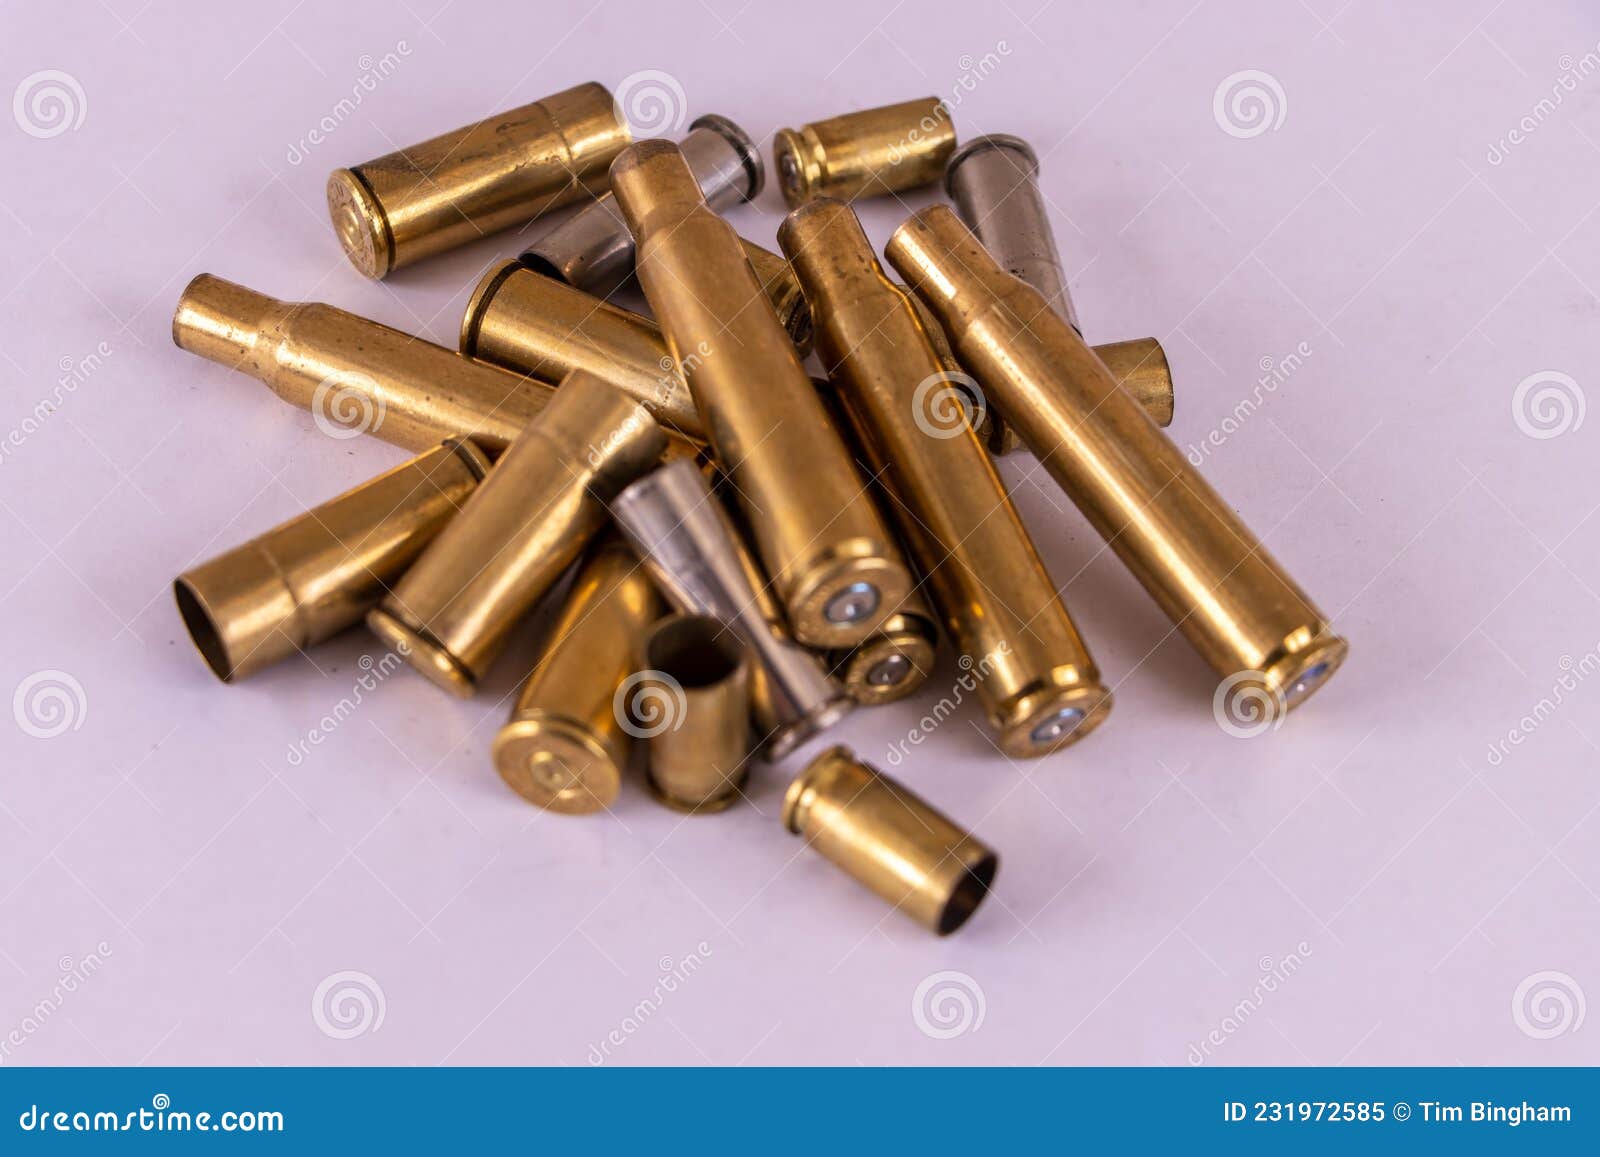 Pile of Mixed Spent Bullet Casings Stock Image - Image of black